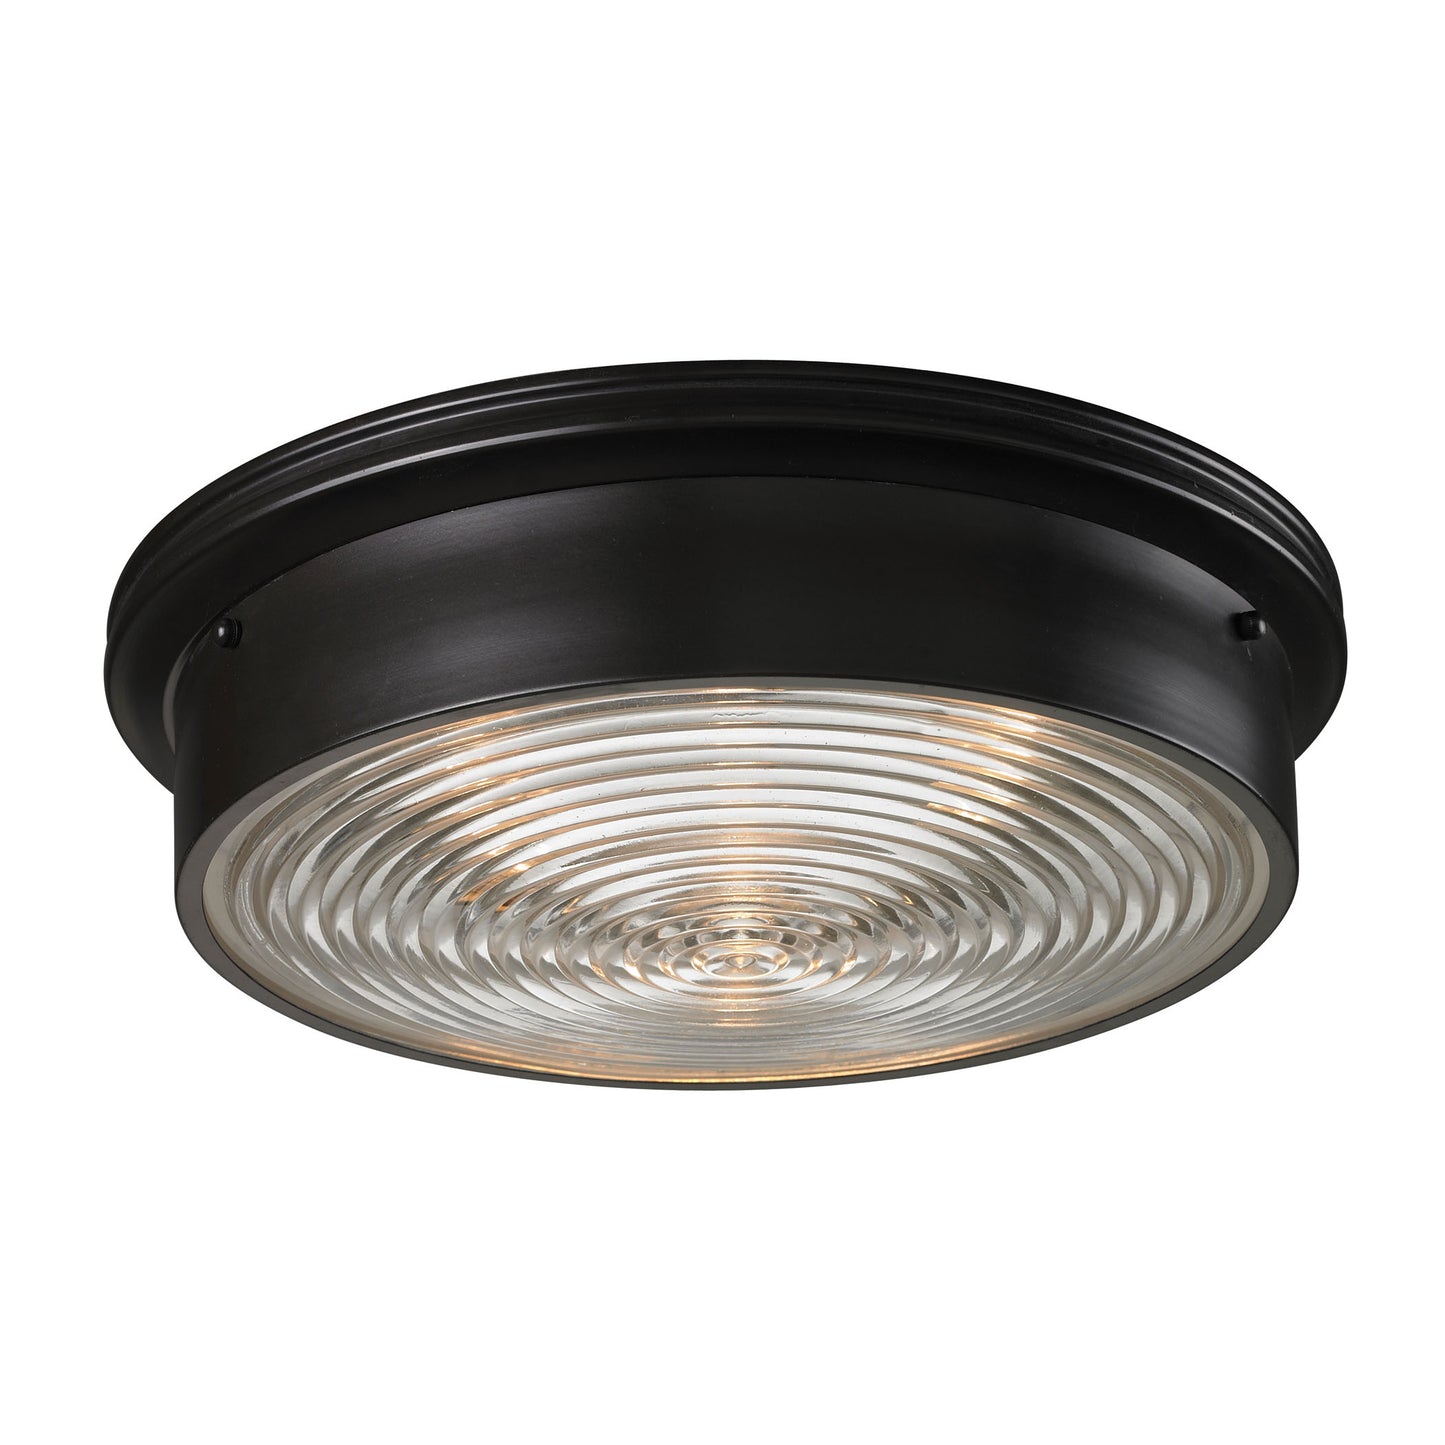 Chadwick 3-Light Flush Mount in Oiled Bronze with Diffuser